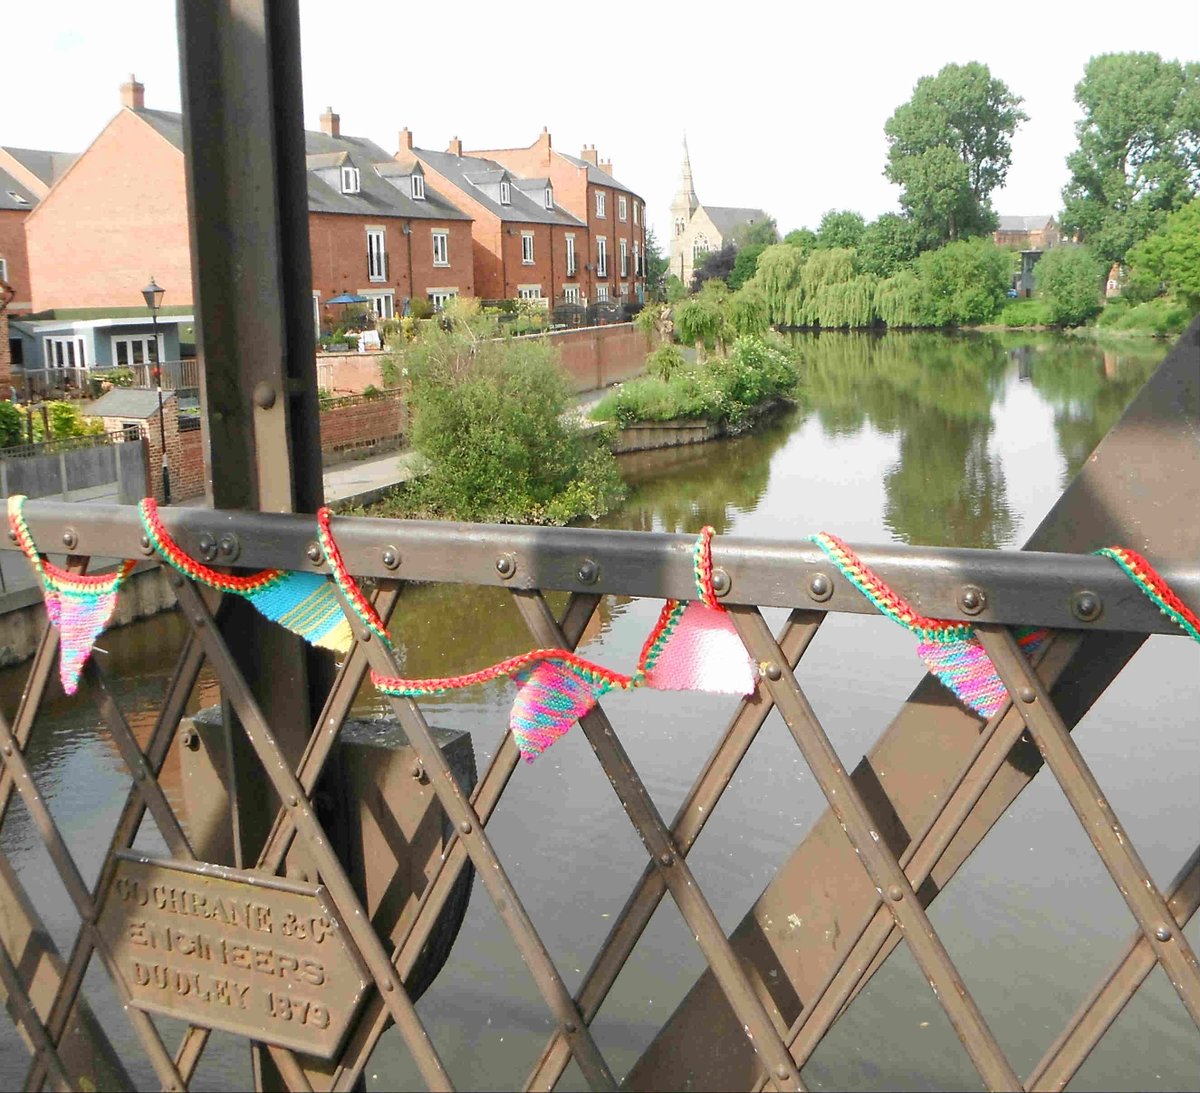 People in #Shrewsbury will have noticed the #yarnbombing on the town's bridges - all part of the #BelleVueArtsFestival >> @Amy4BelleVue @BelleVAF